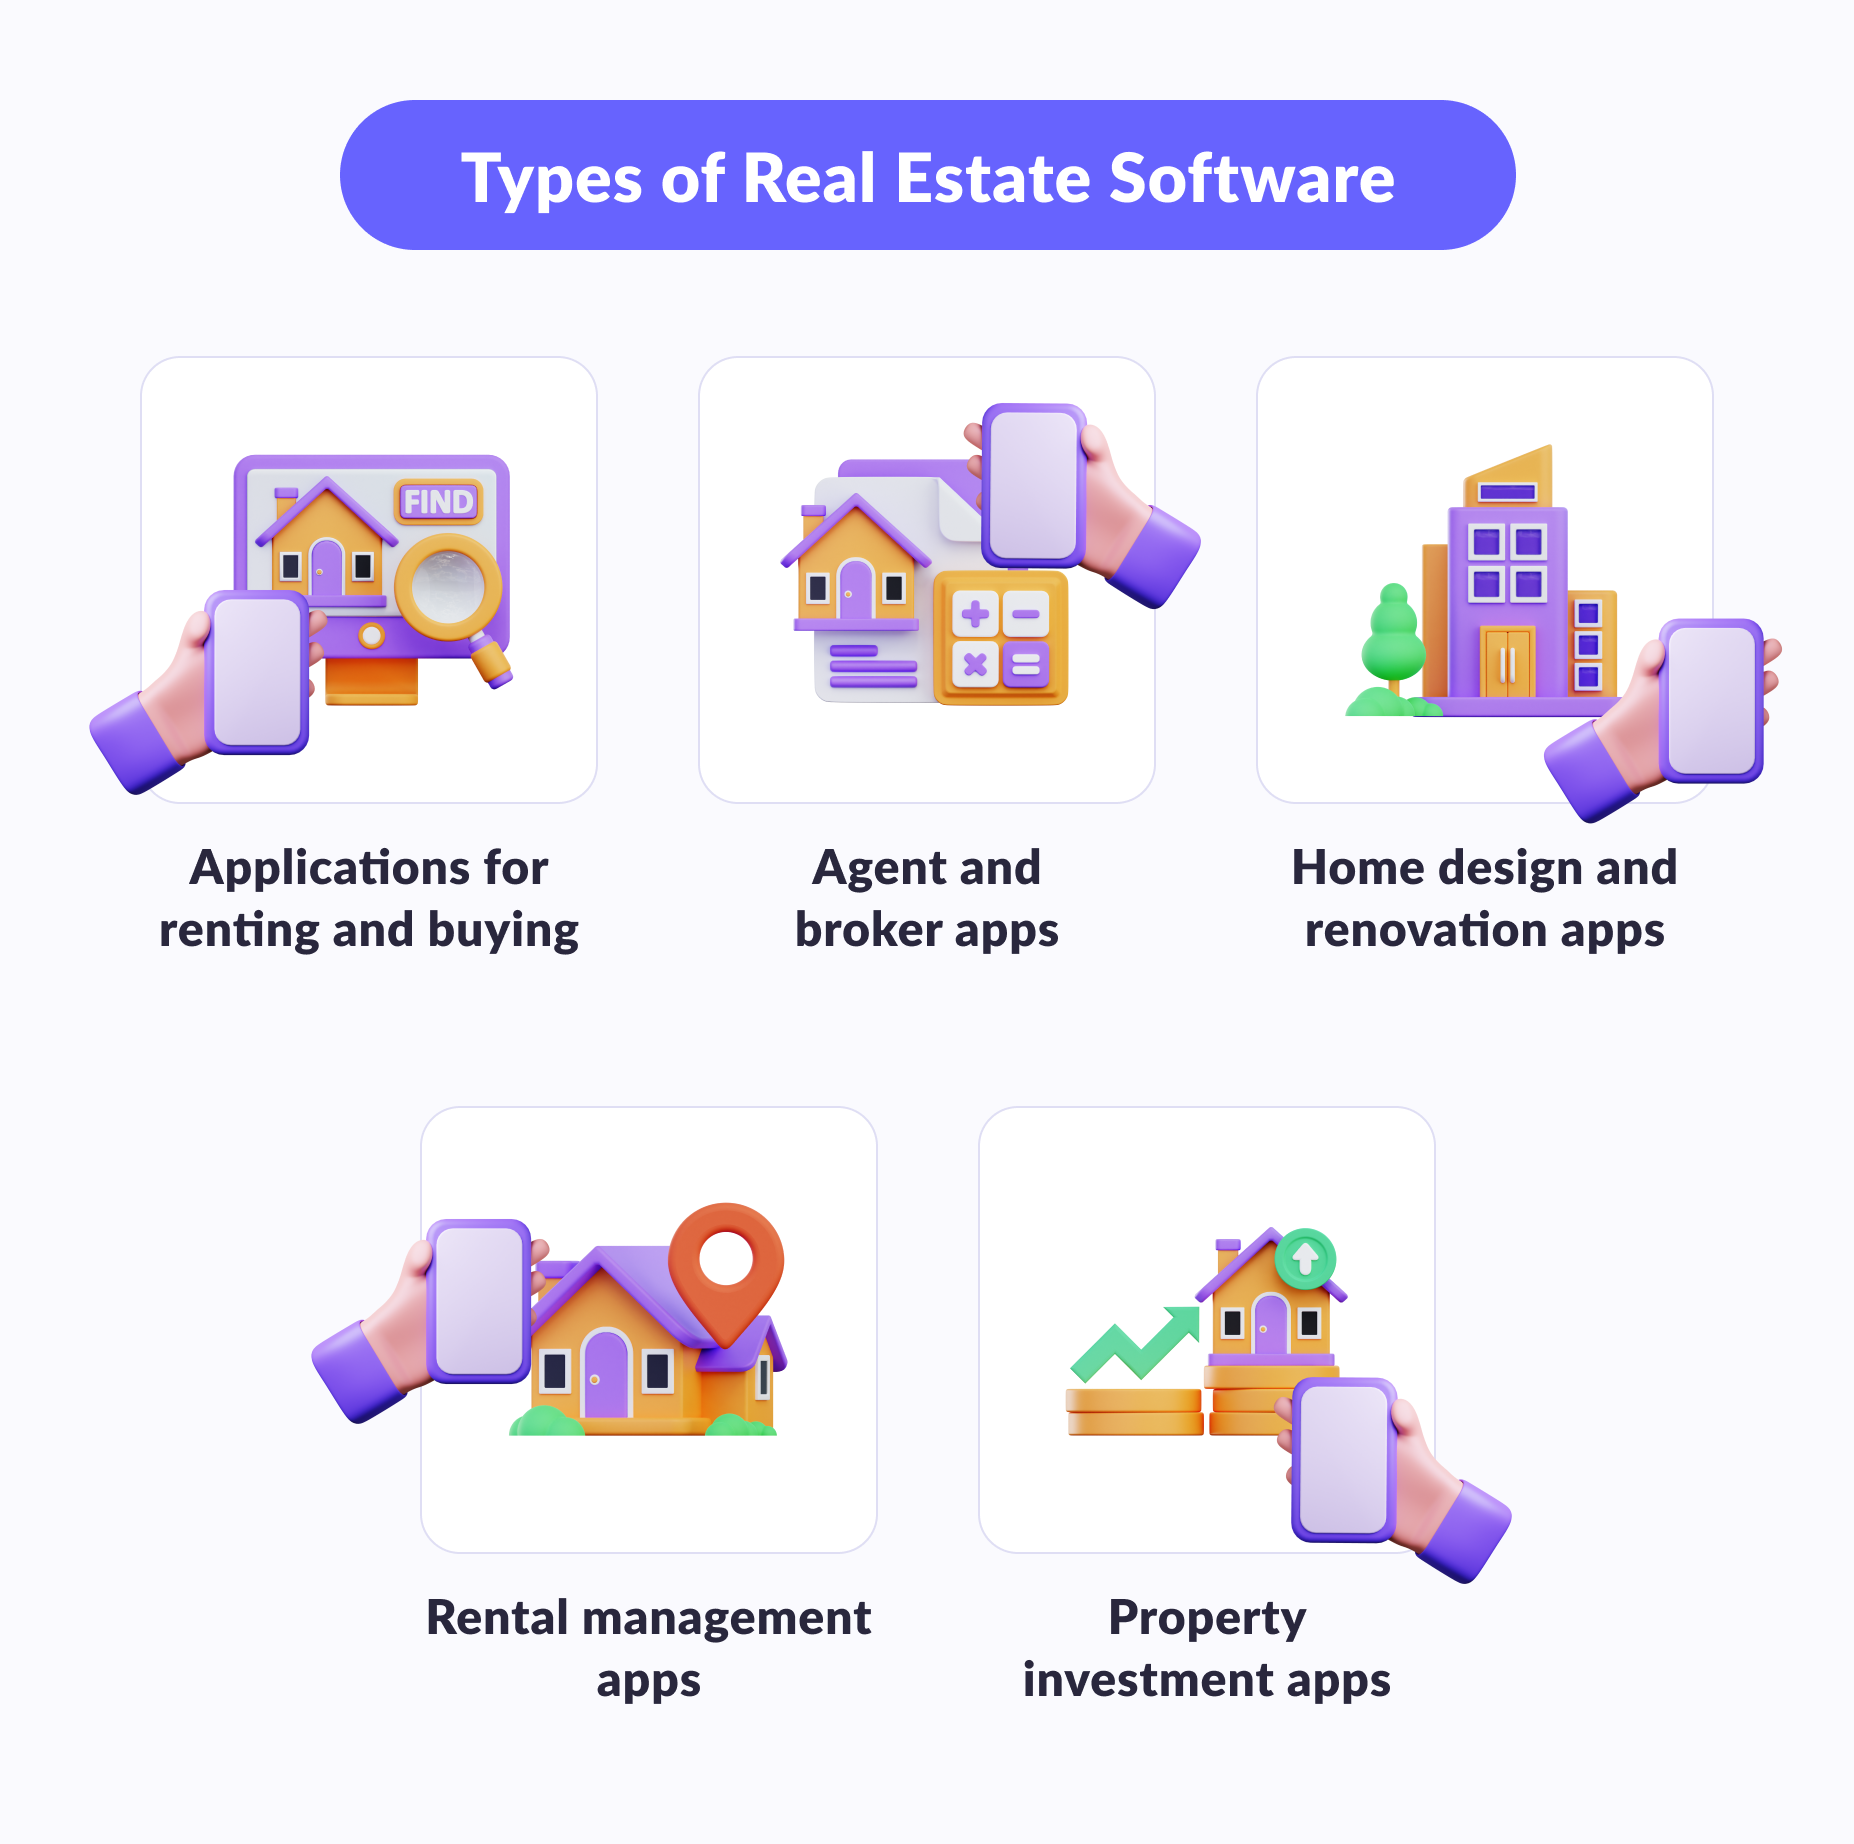 Types of real estate software